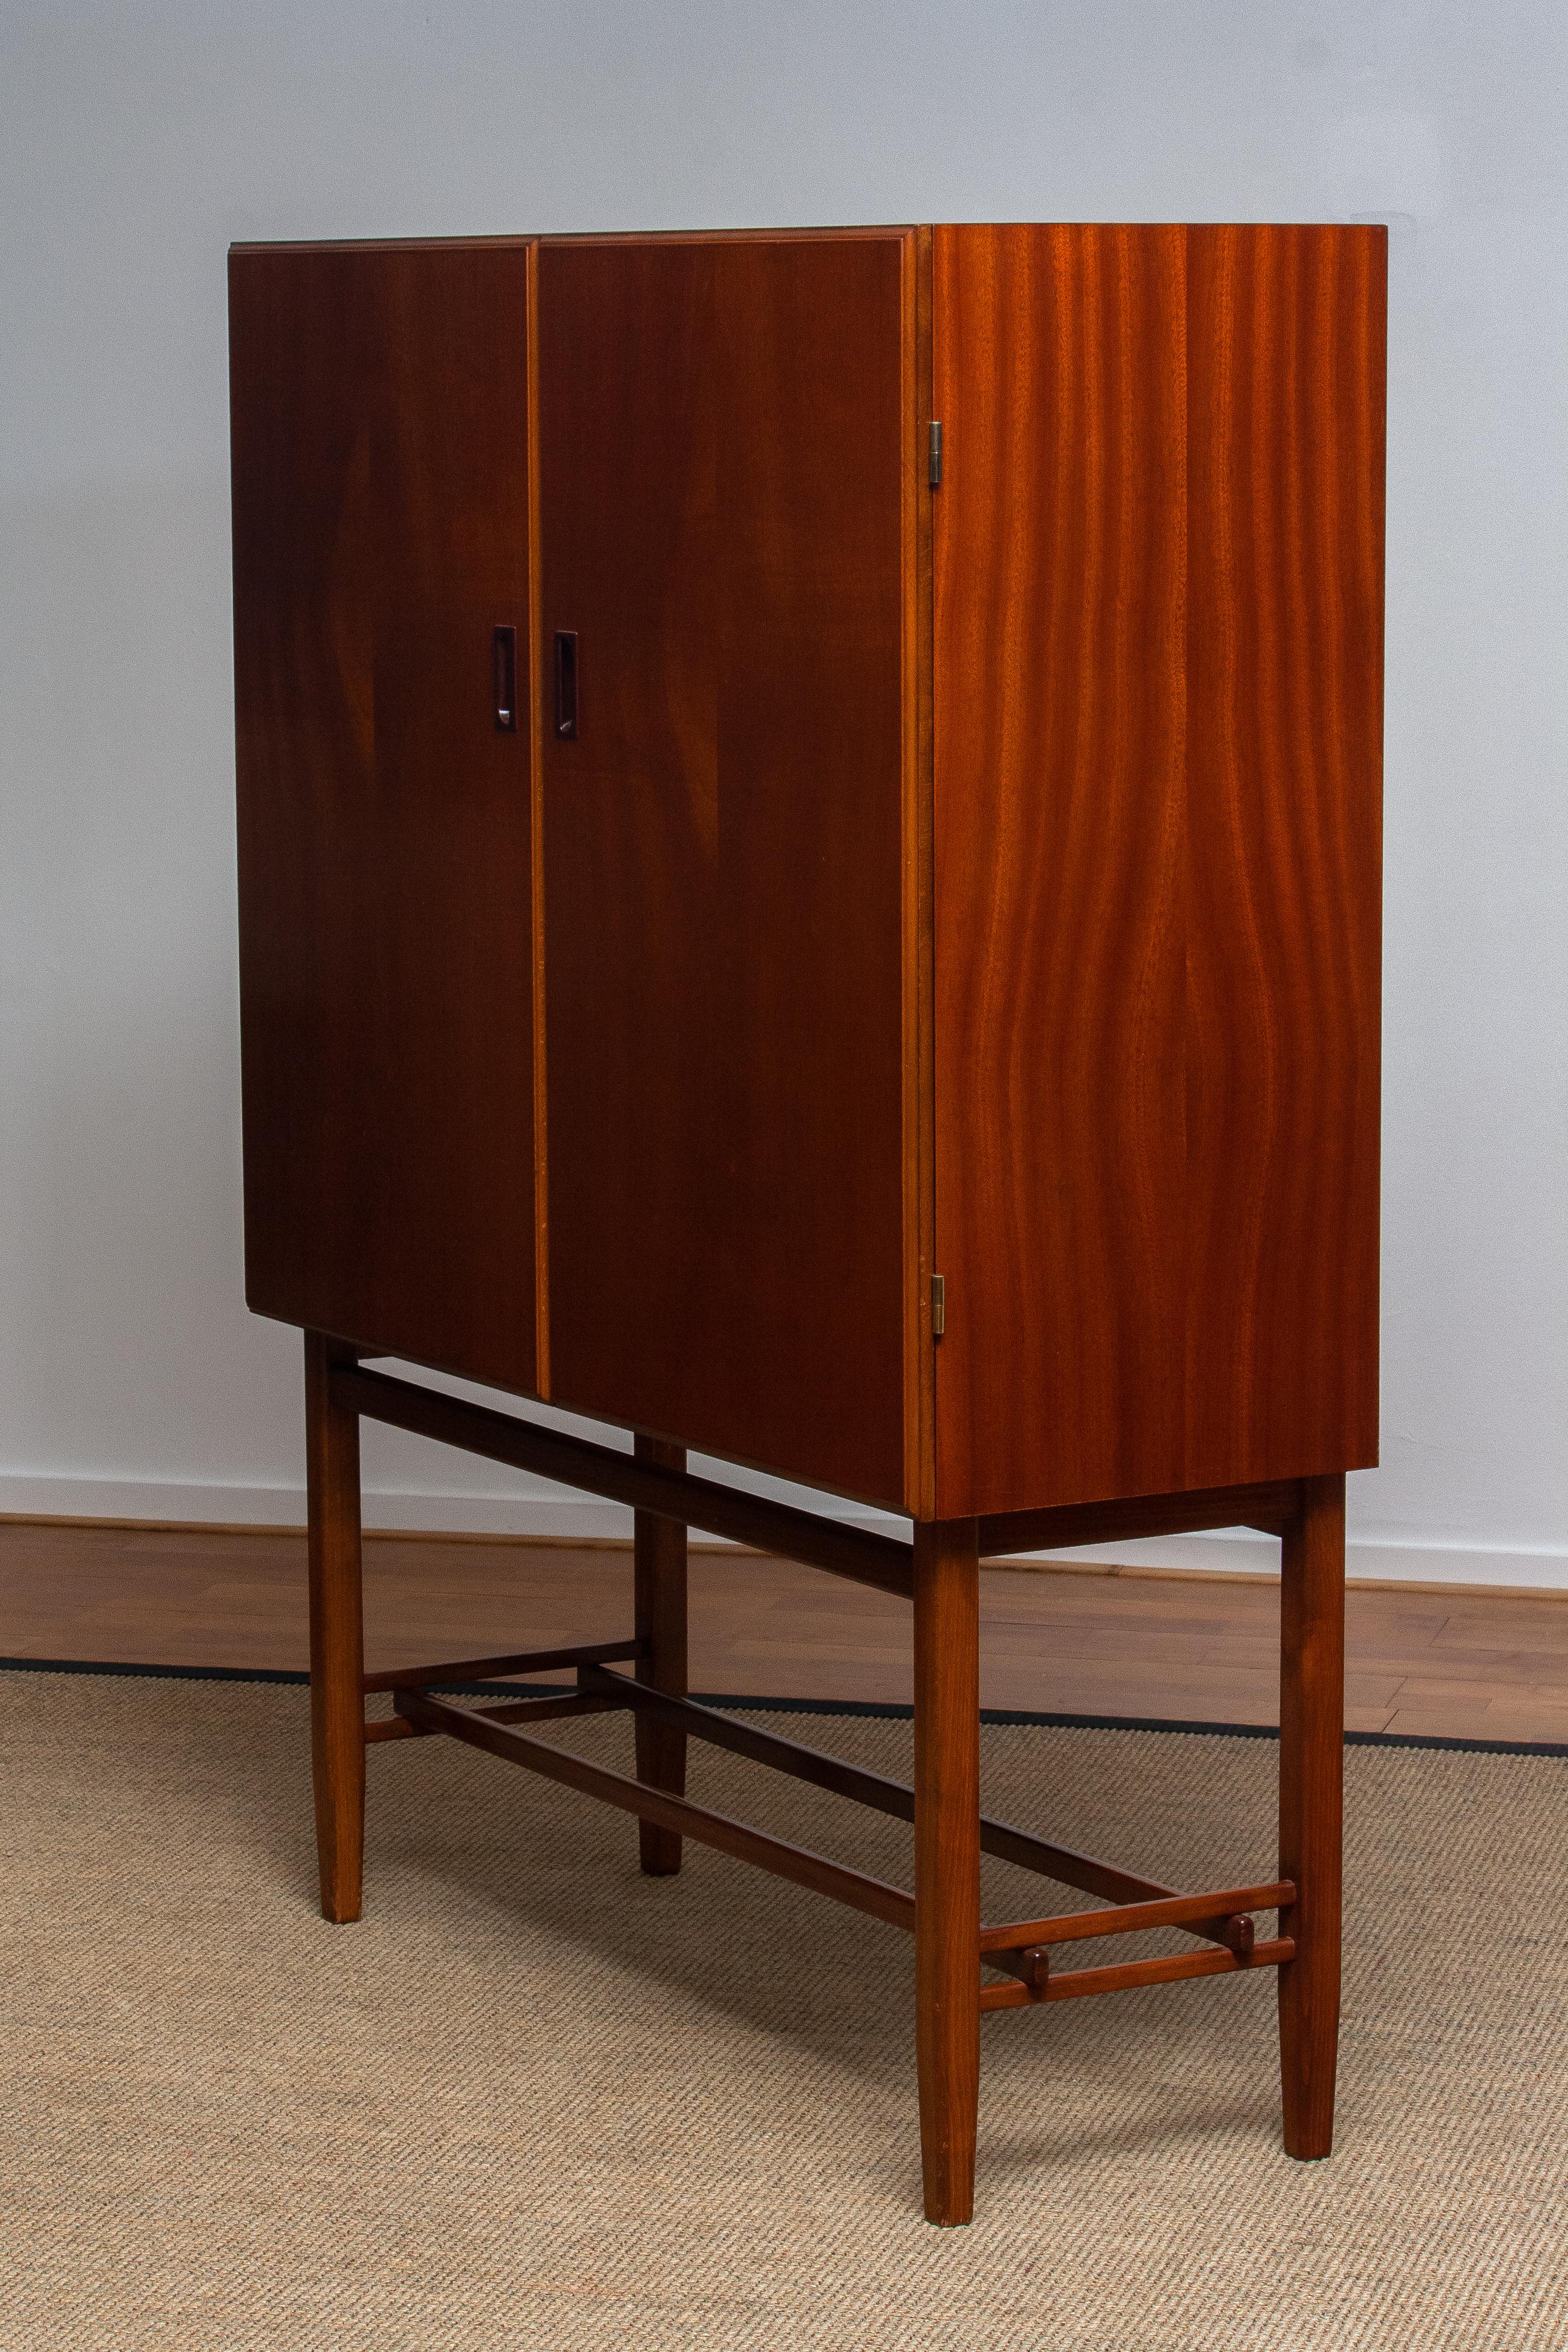 Mid-20th Century 1950s, Slim Midcentury Mahogany Dry Bar or Cabinet by Forenades Mobler, Sweden